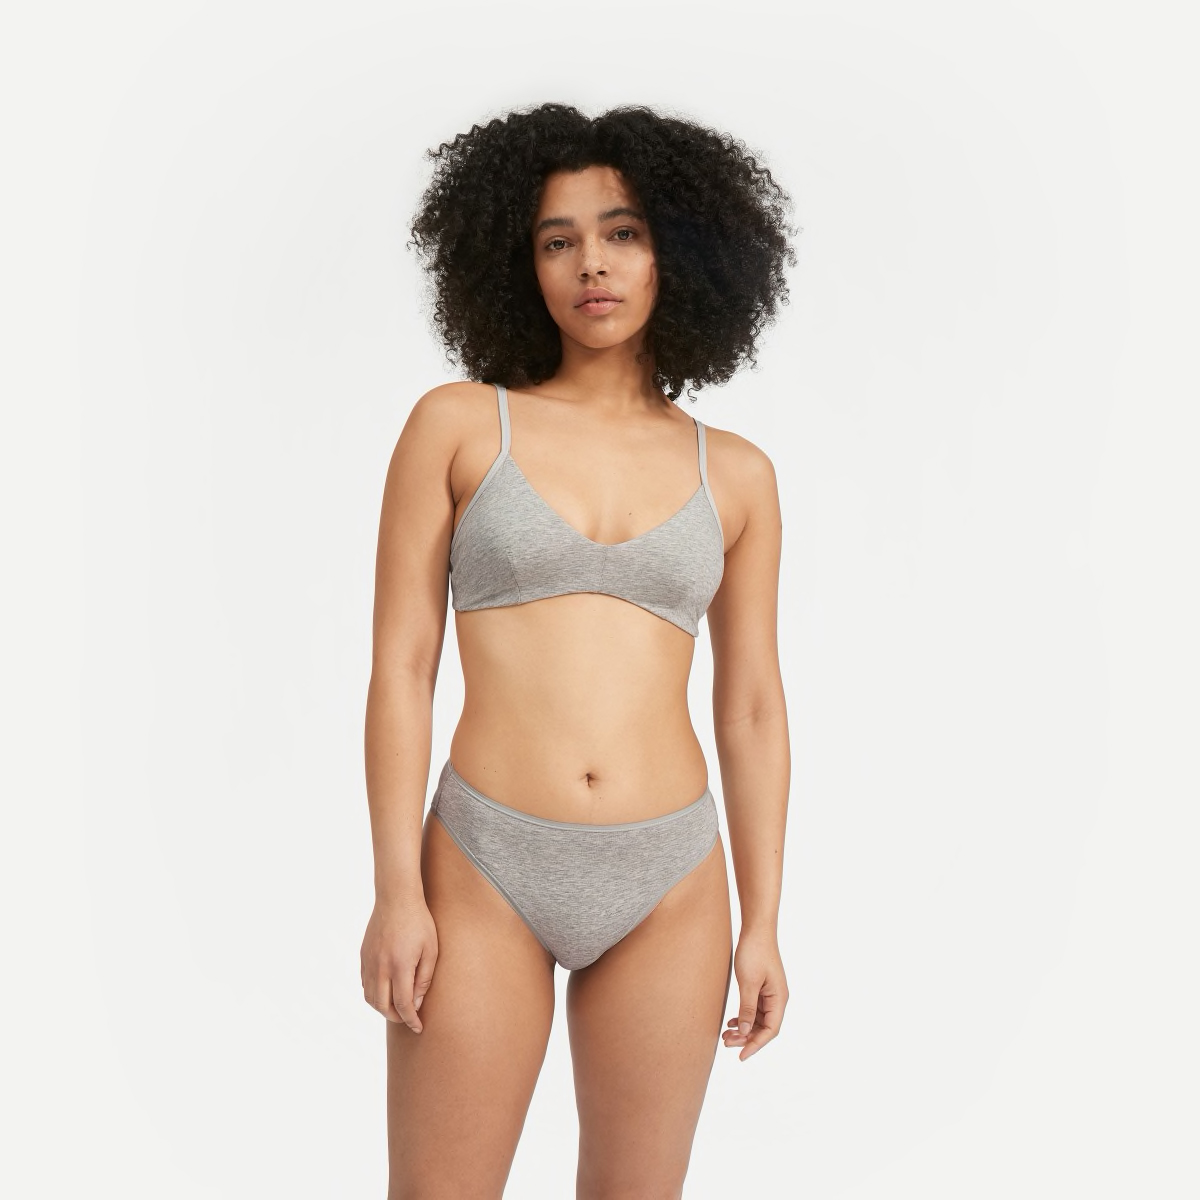 EXTRA LARGE - - BEIGE Details about   COMFORT SUPERSOFT LOUNGEWEAR BRA 39-42 INCHES